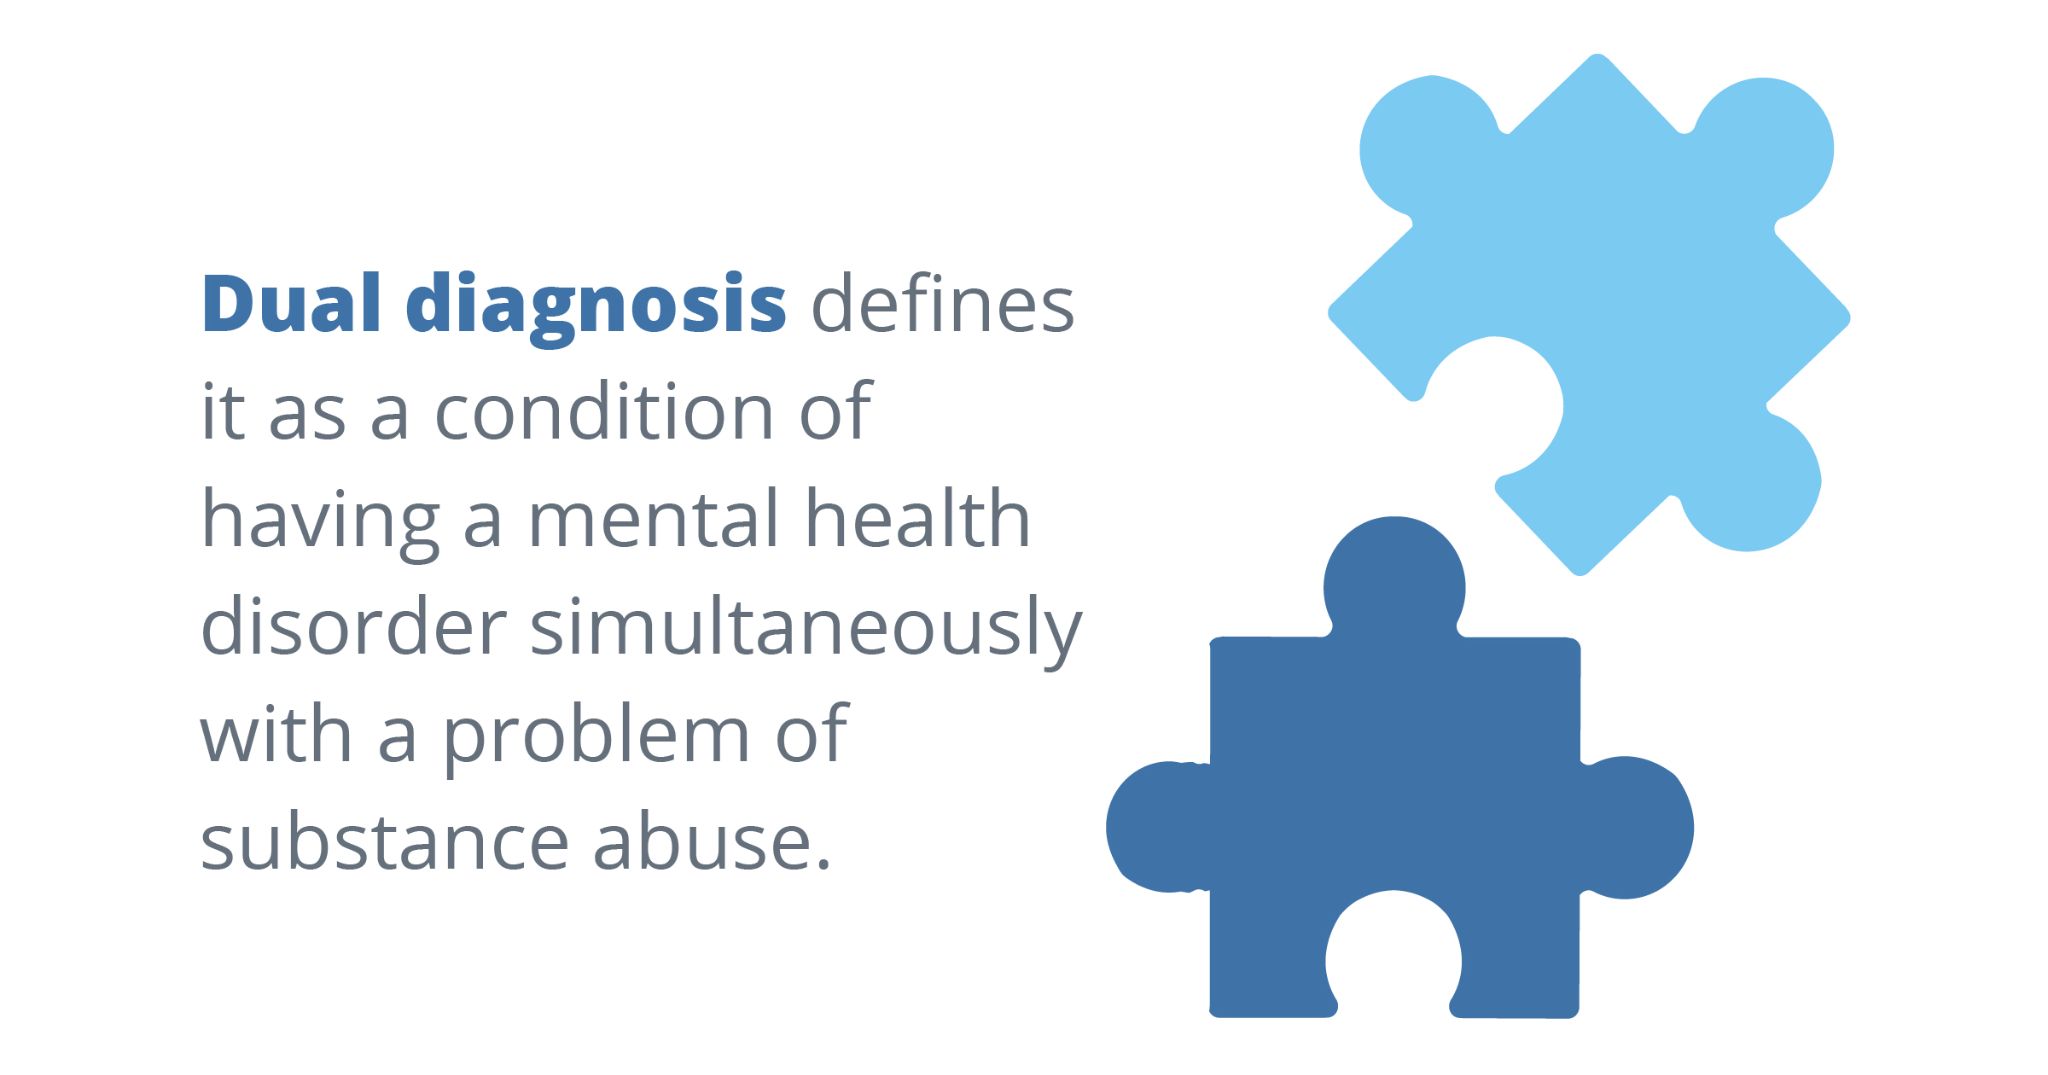 Dual Diagnosis defines it as a condition of having a mental health disorder simultaneously with a problem of substance abuse.